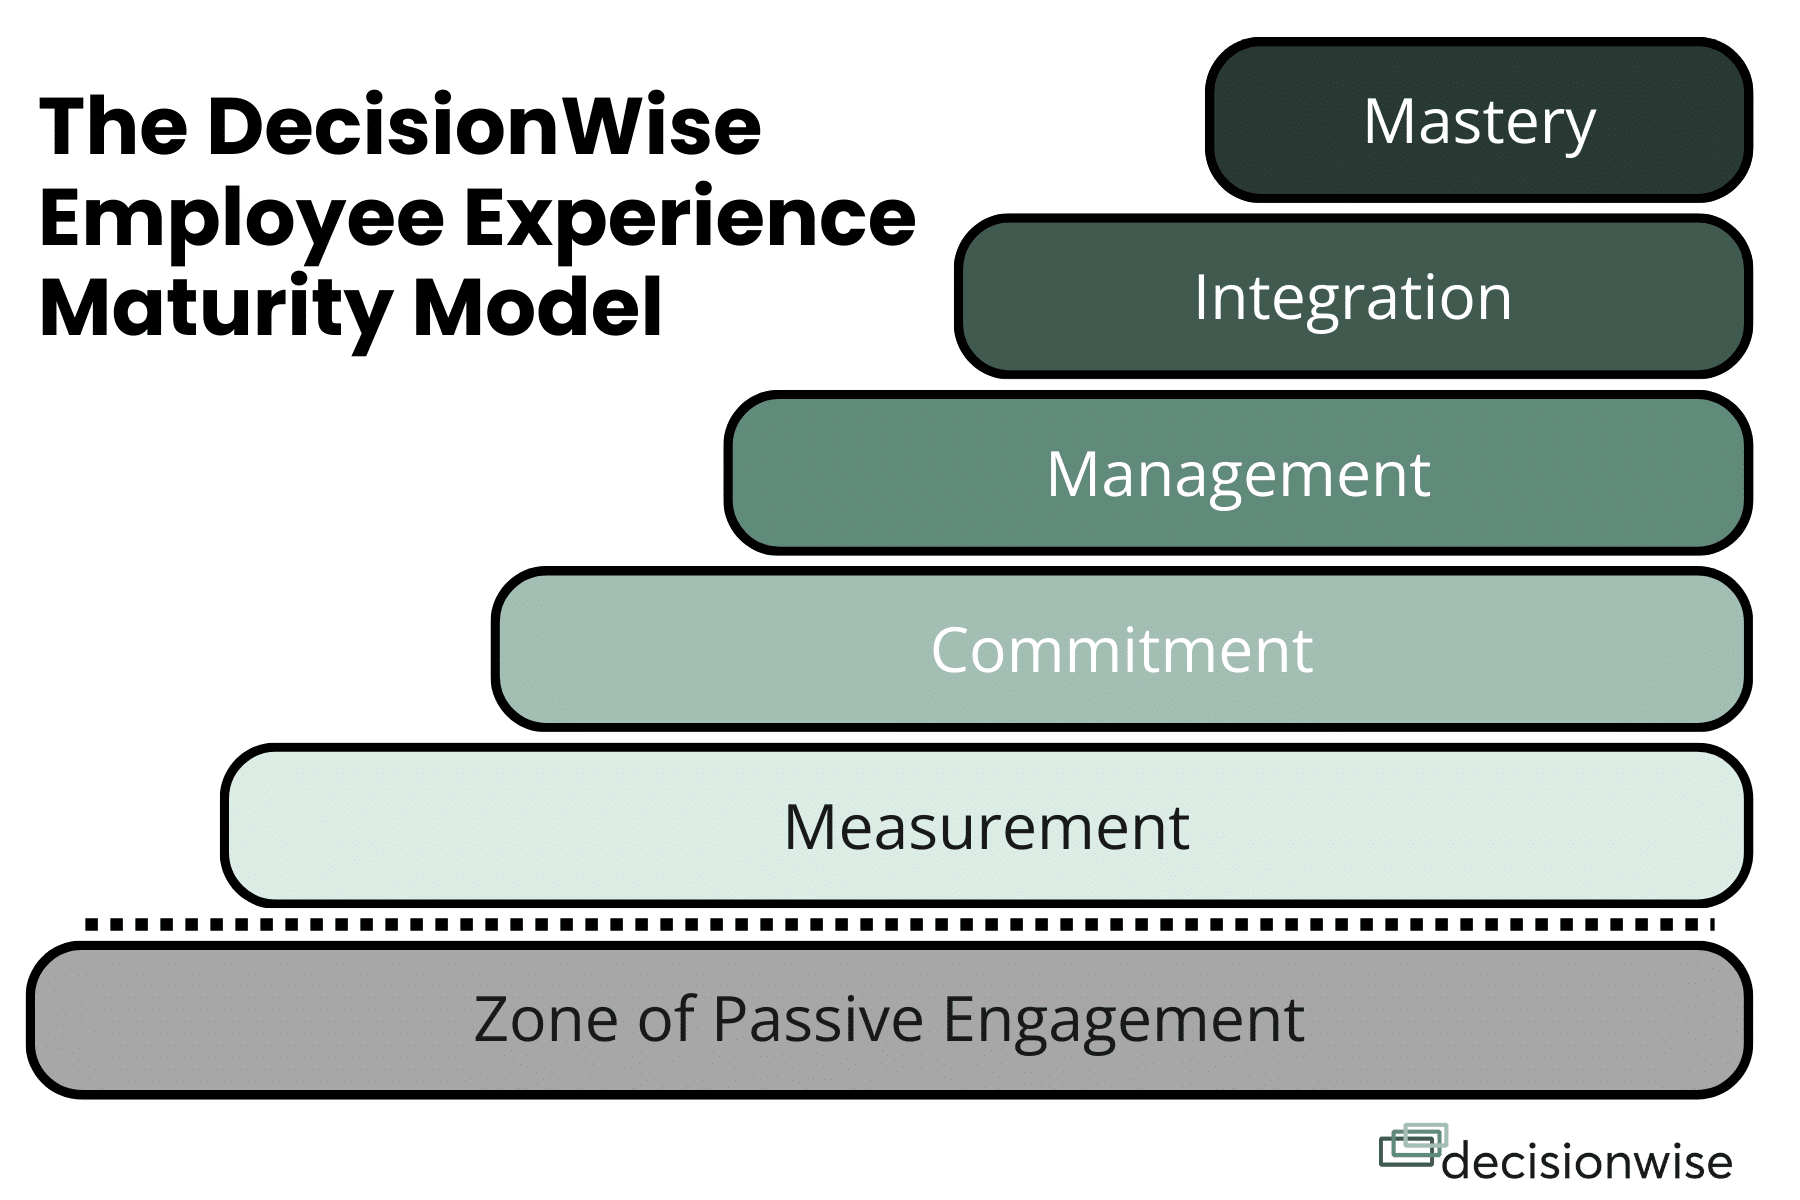 A graphic illustrating the Employee Experience Maturity Model